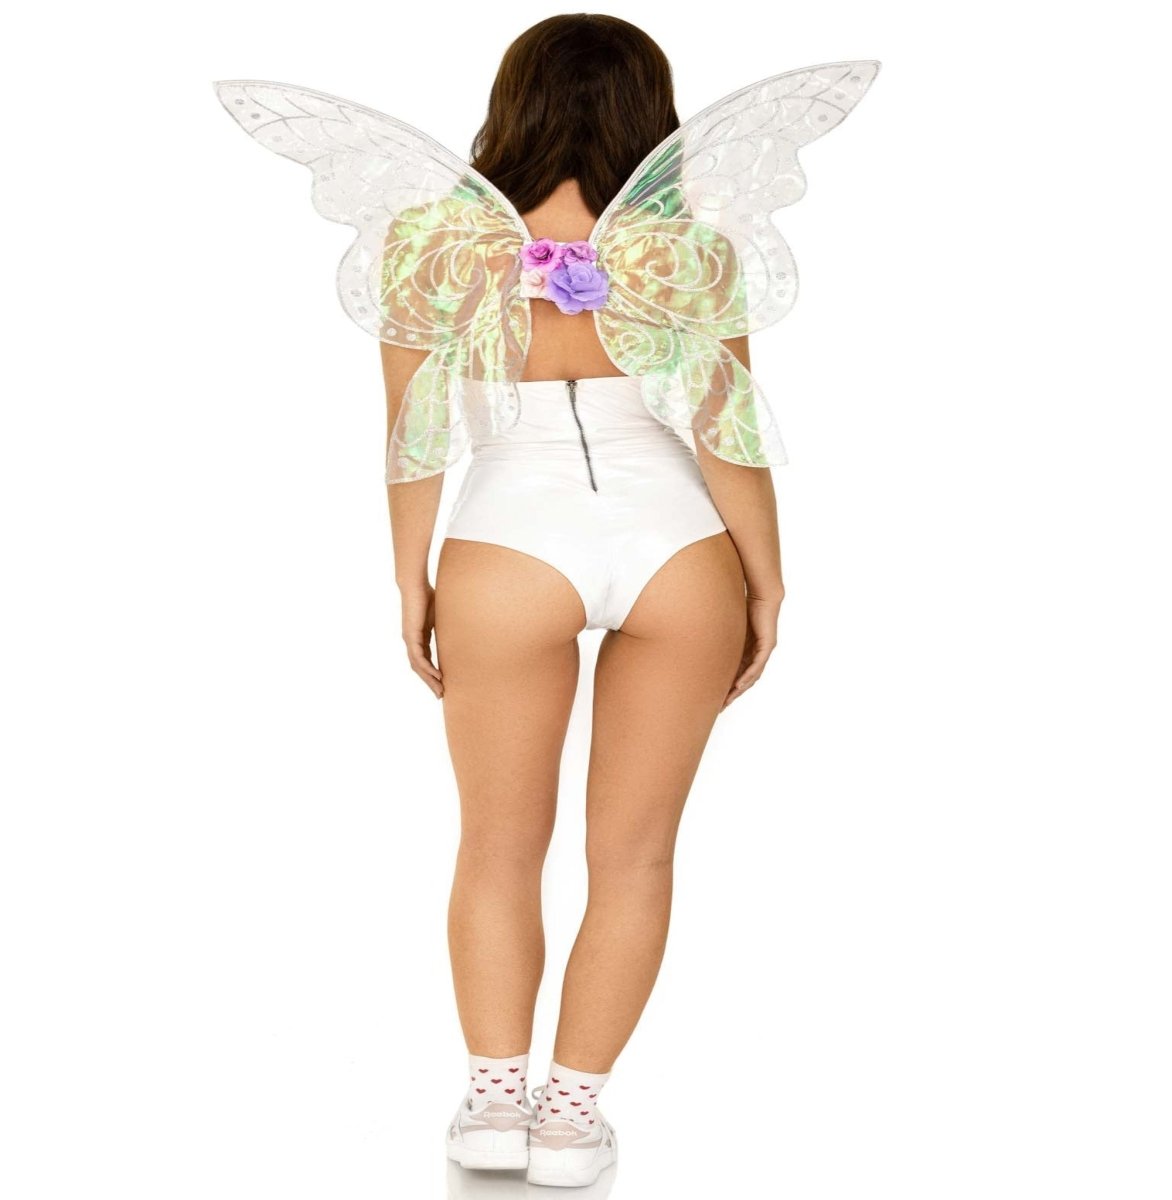 Iridescent glitter fairy wings with flower accent. - worldclasscostumes